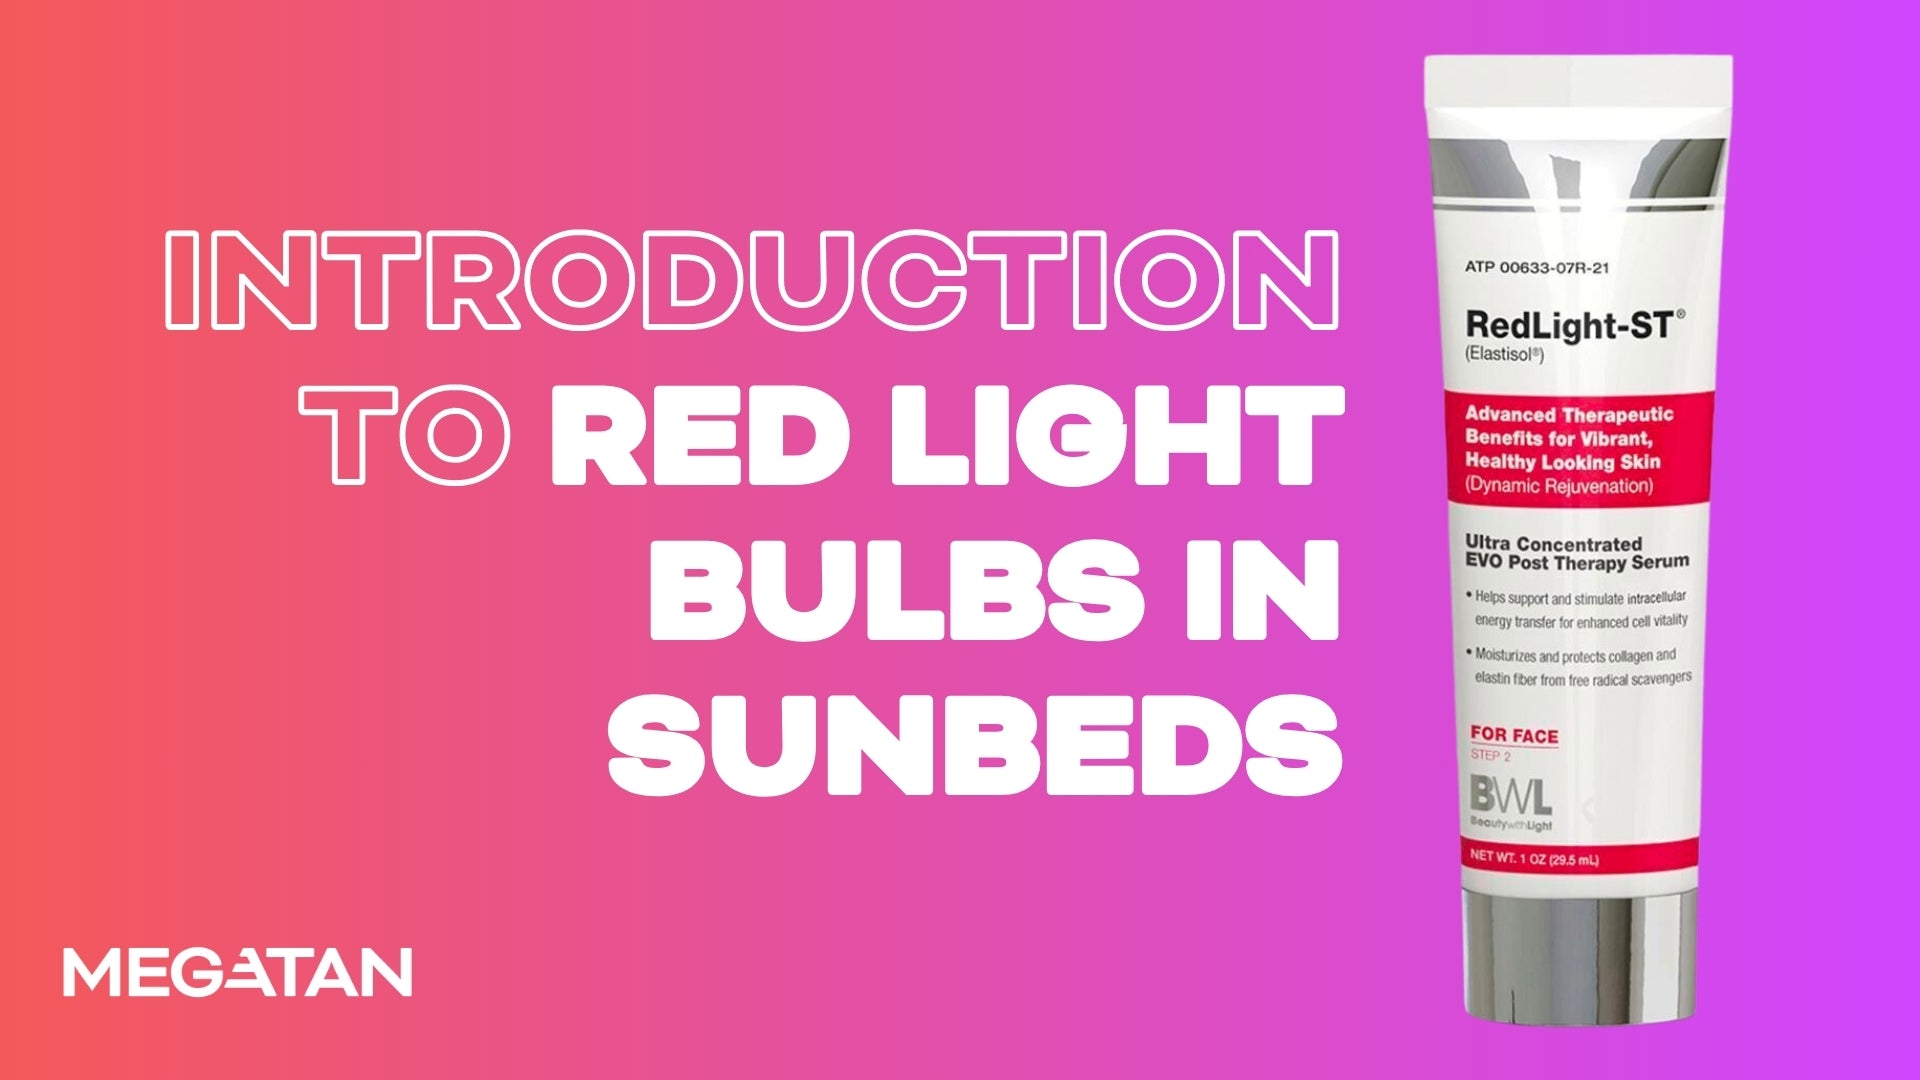 Introduction to Red Light Bulbs in Sunbeds